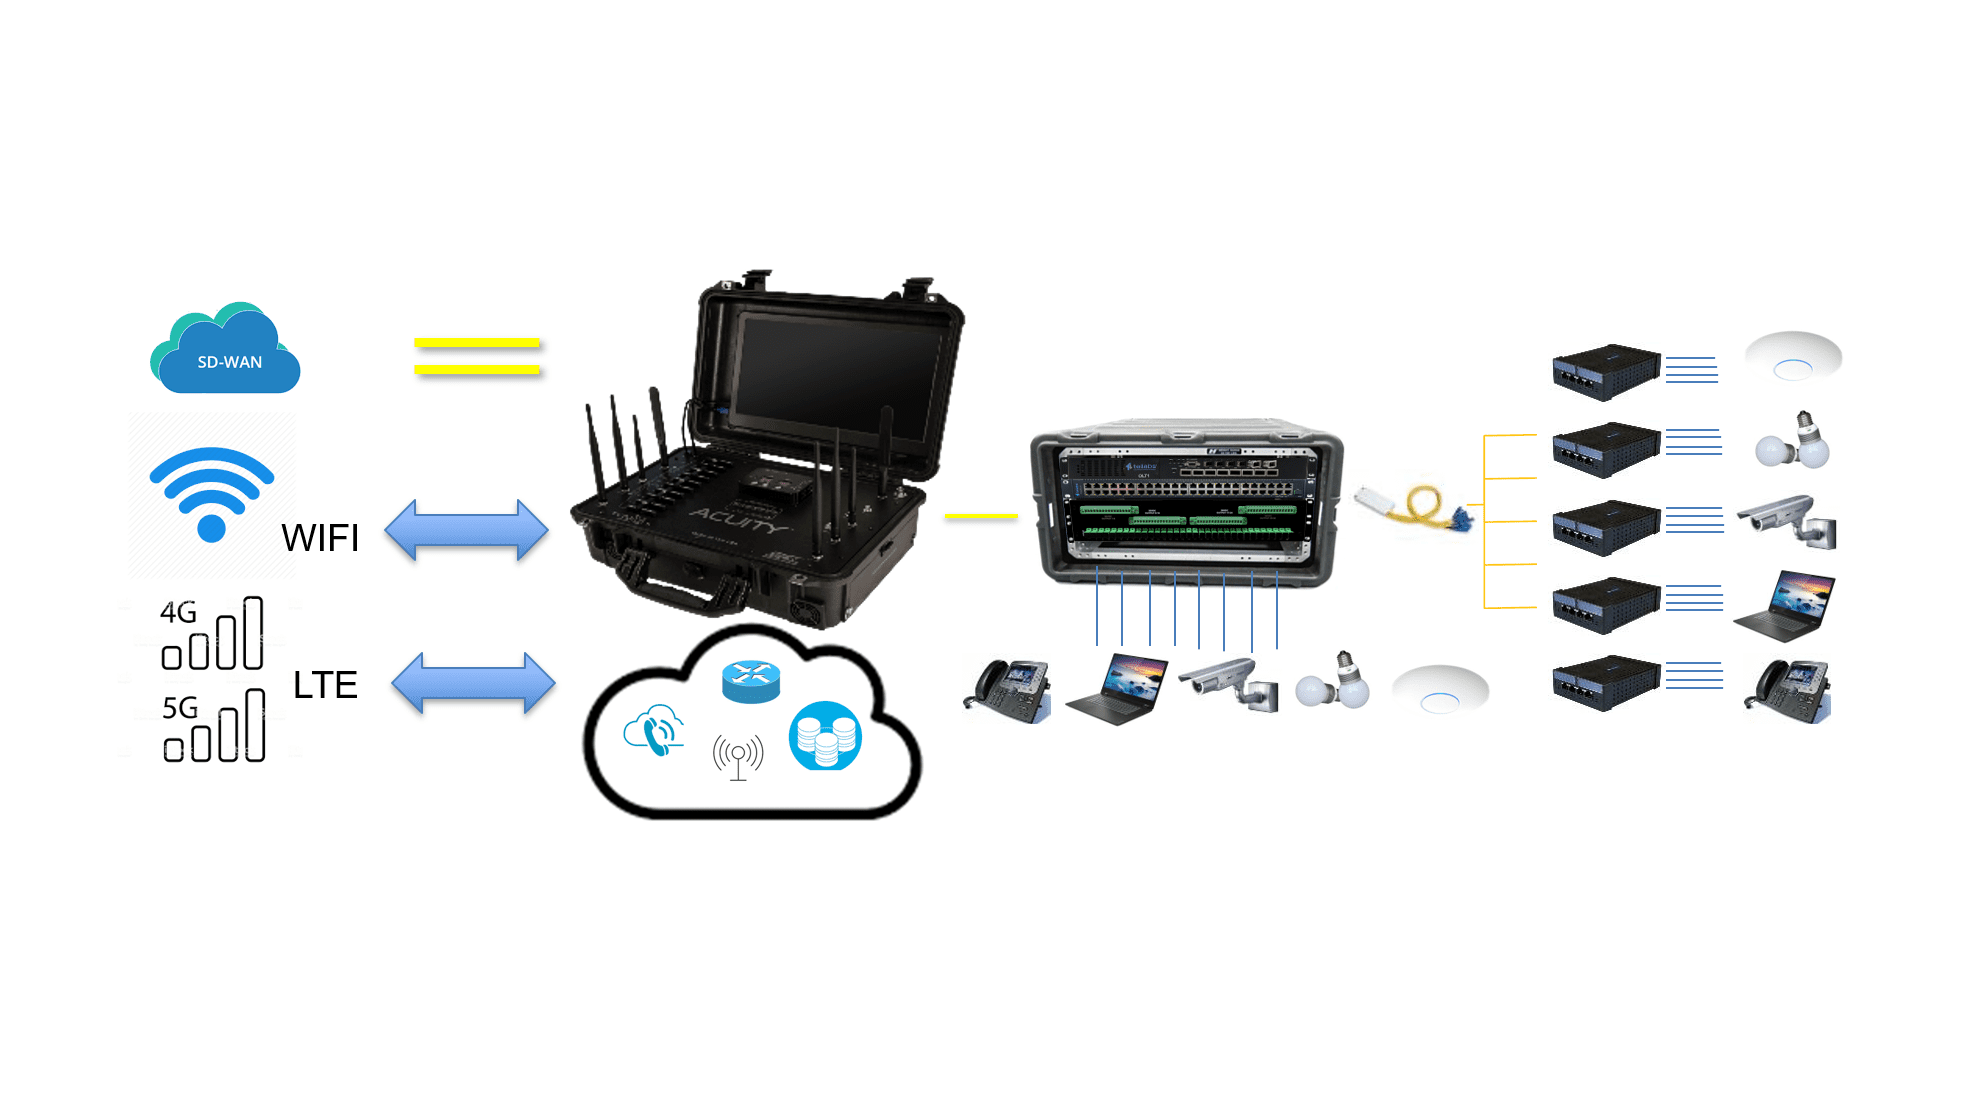 ACUITY LAN tactical, temporary and transportable communications